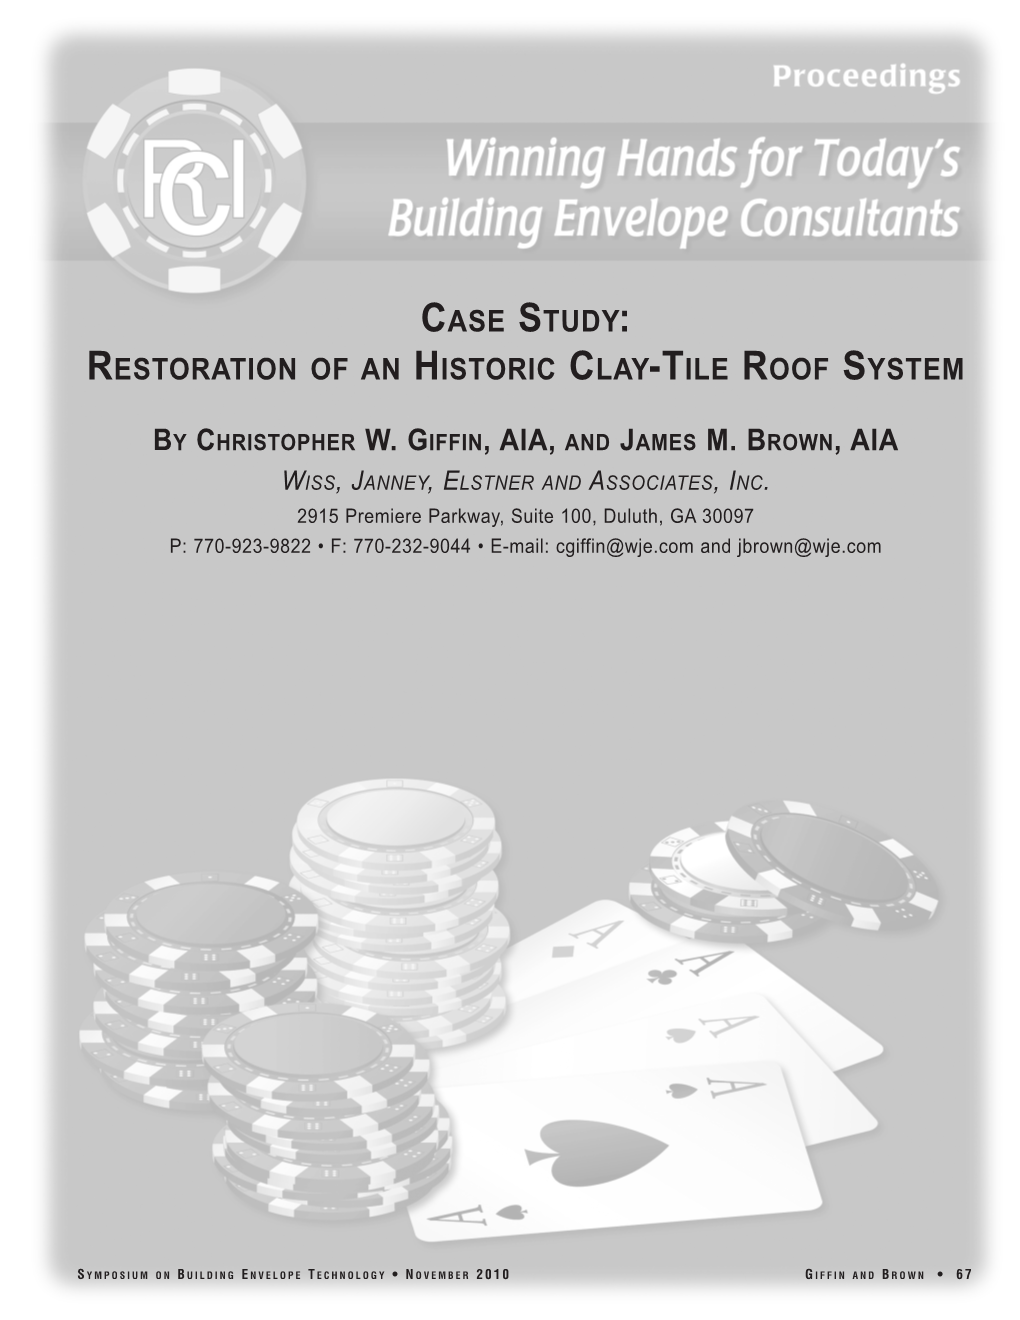 Case Study: Restoration of an Historic Clay-Tile Roof System